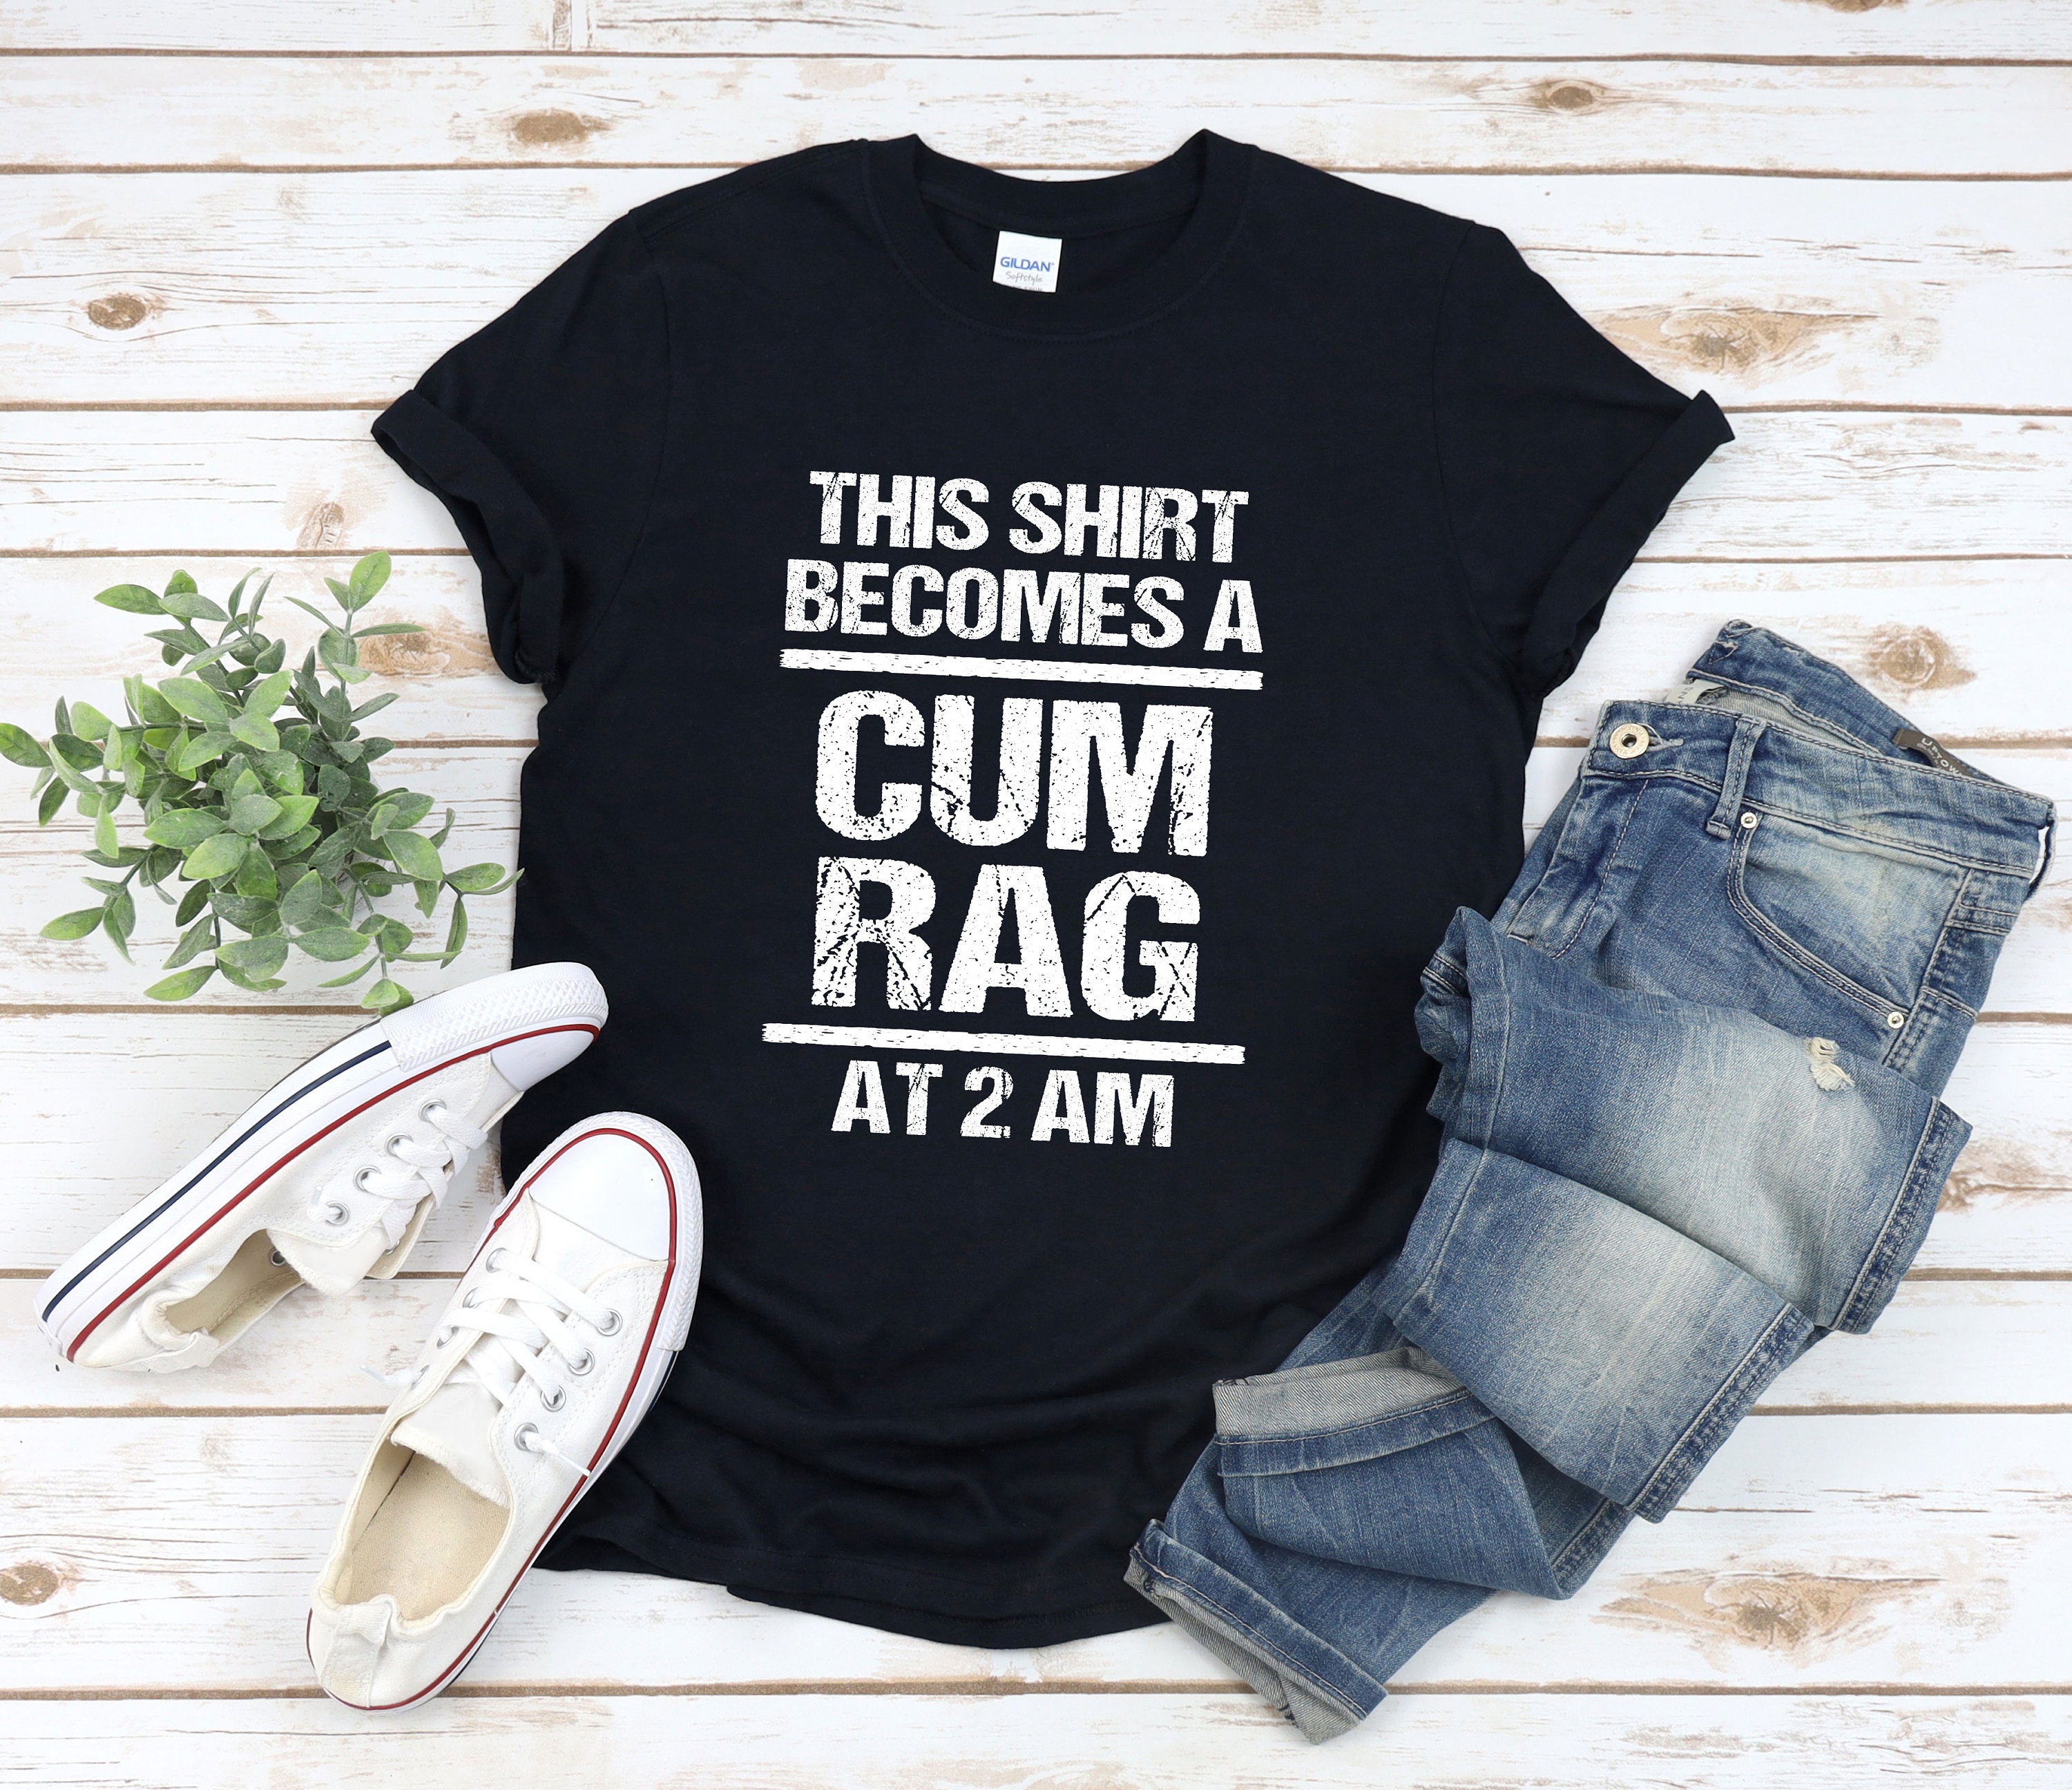 This Shirt Transforms To A Cum Rag Unisex T-Shirt: Inappropriate